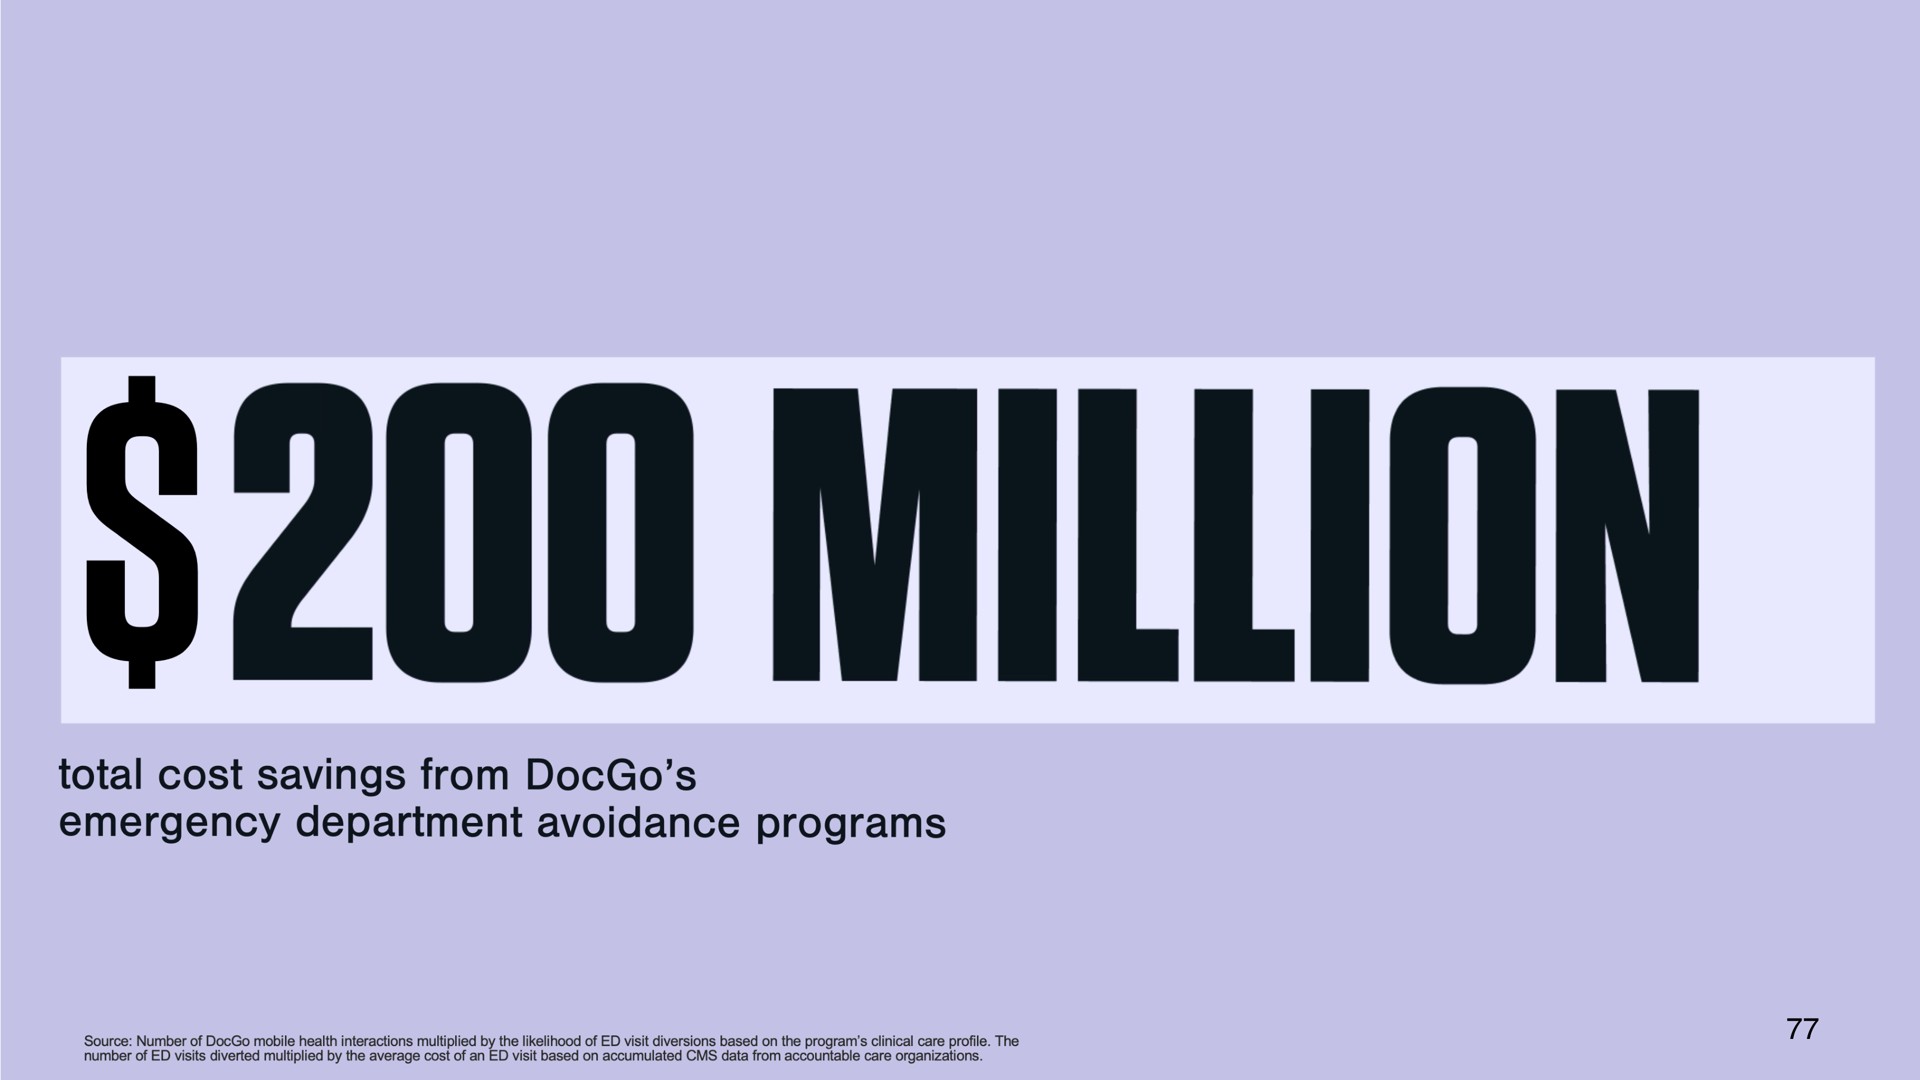 million total cost savings from emergency department avoidance programs | DocGo